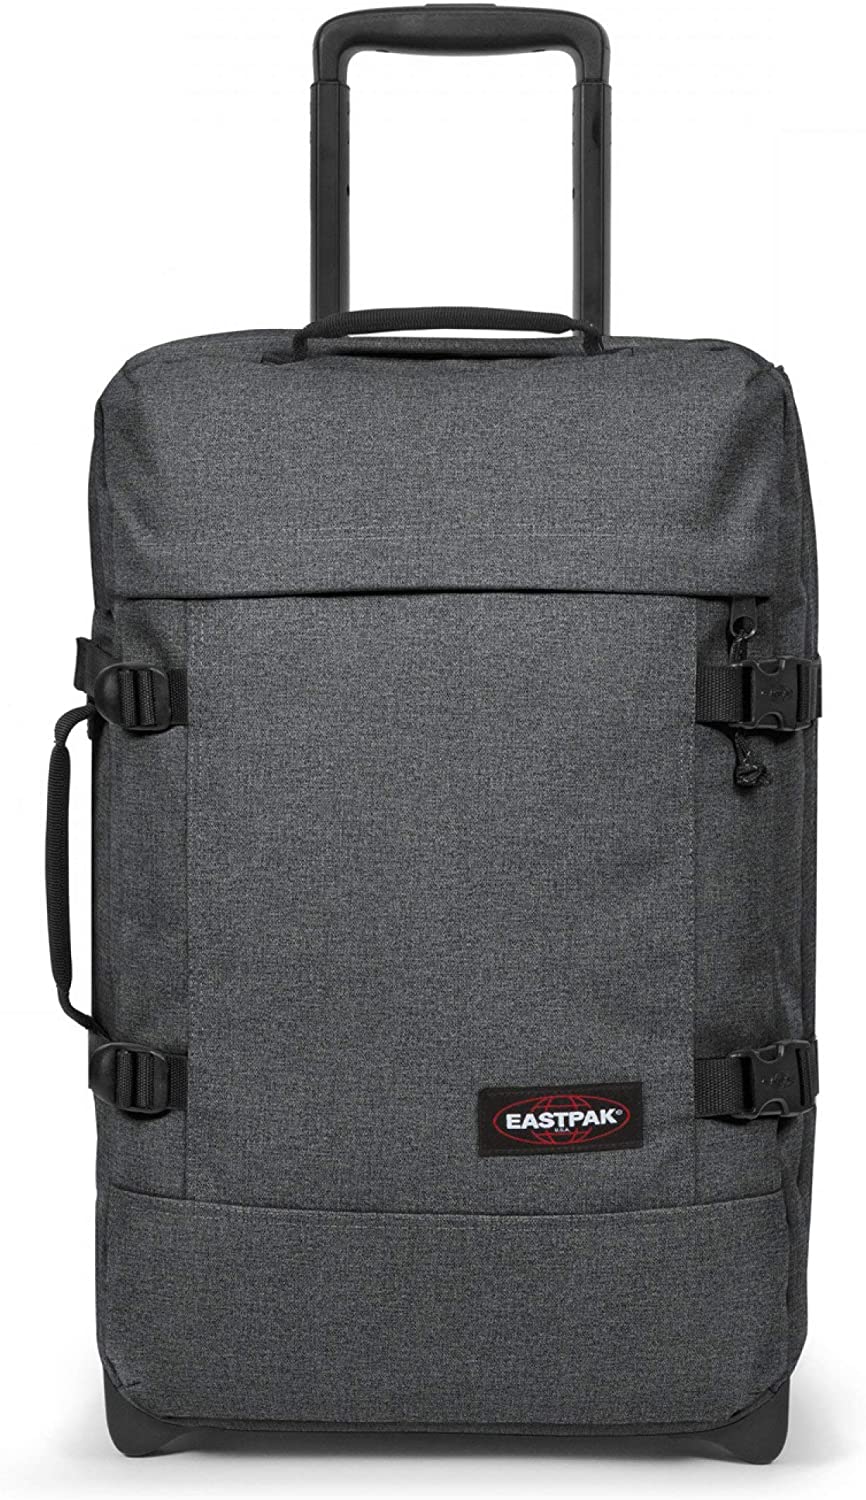 Eastpak Suitcase with Wheel